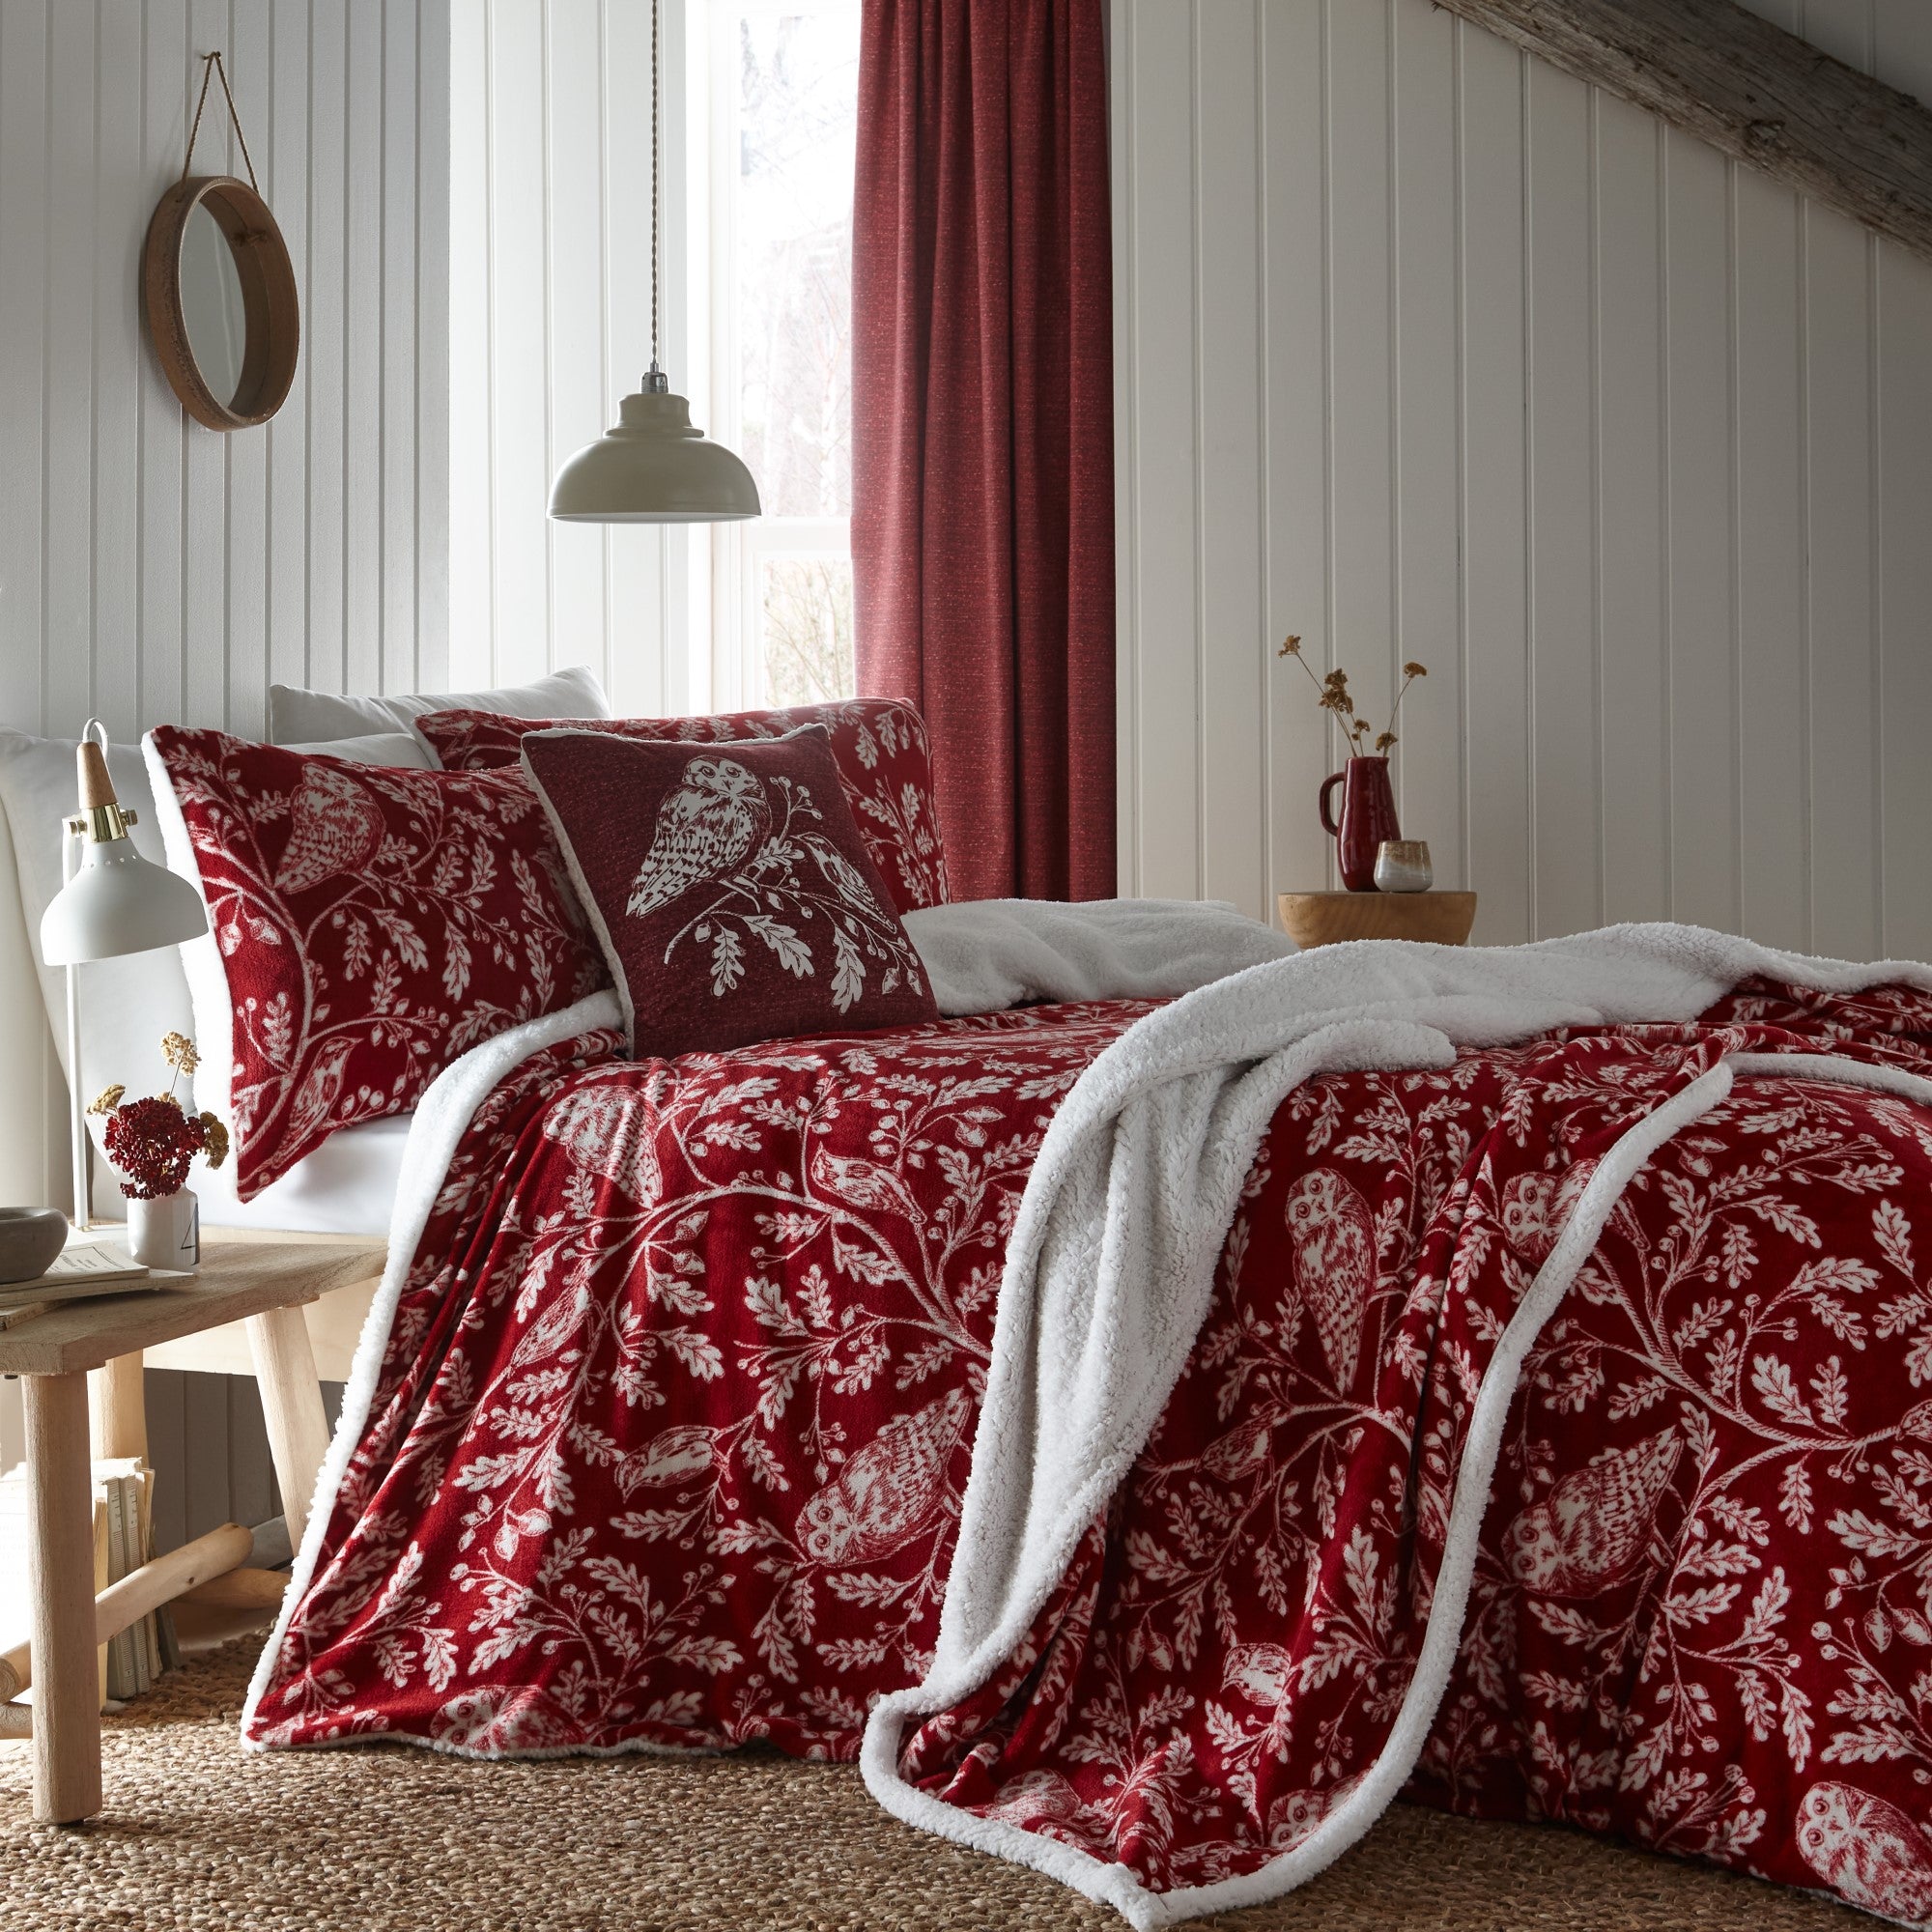 Duvet Cover Set Woodland Owls by D&D Lodge in Red